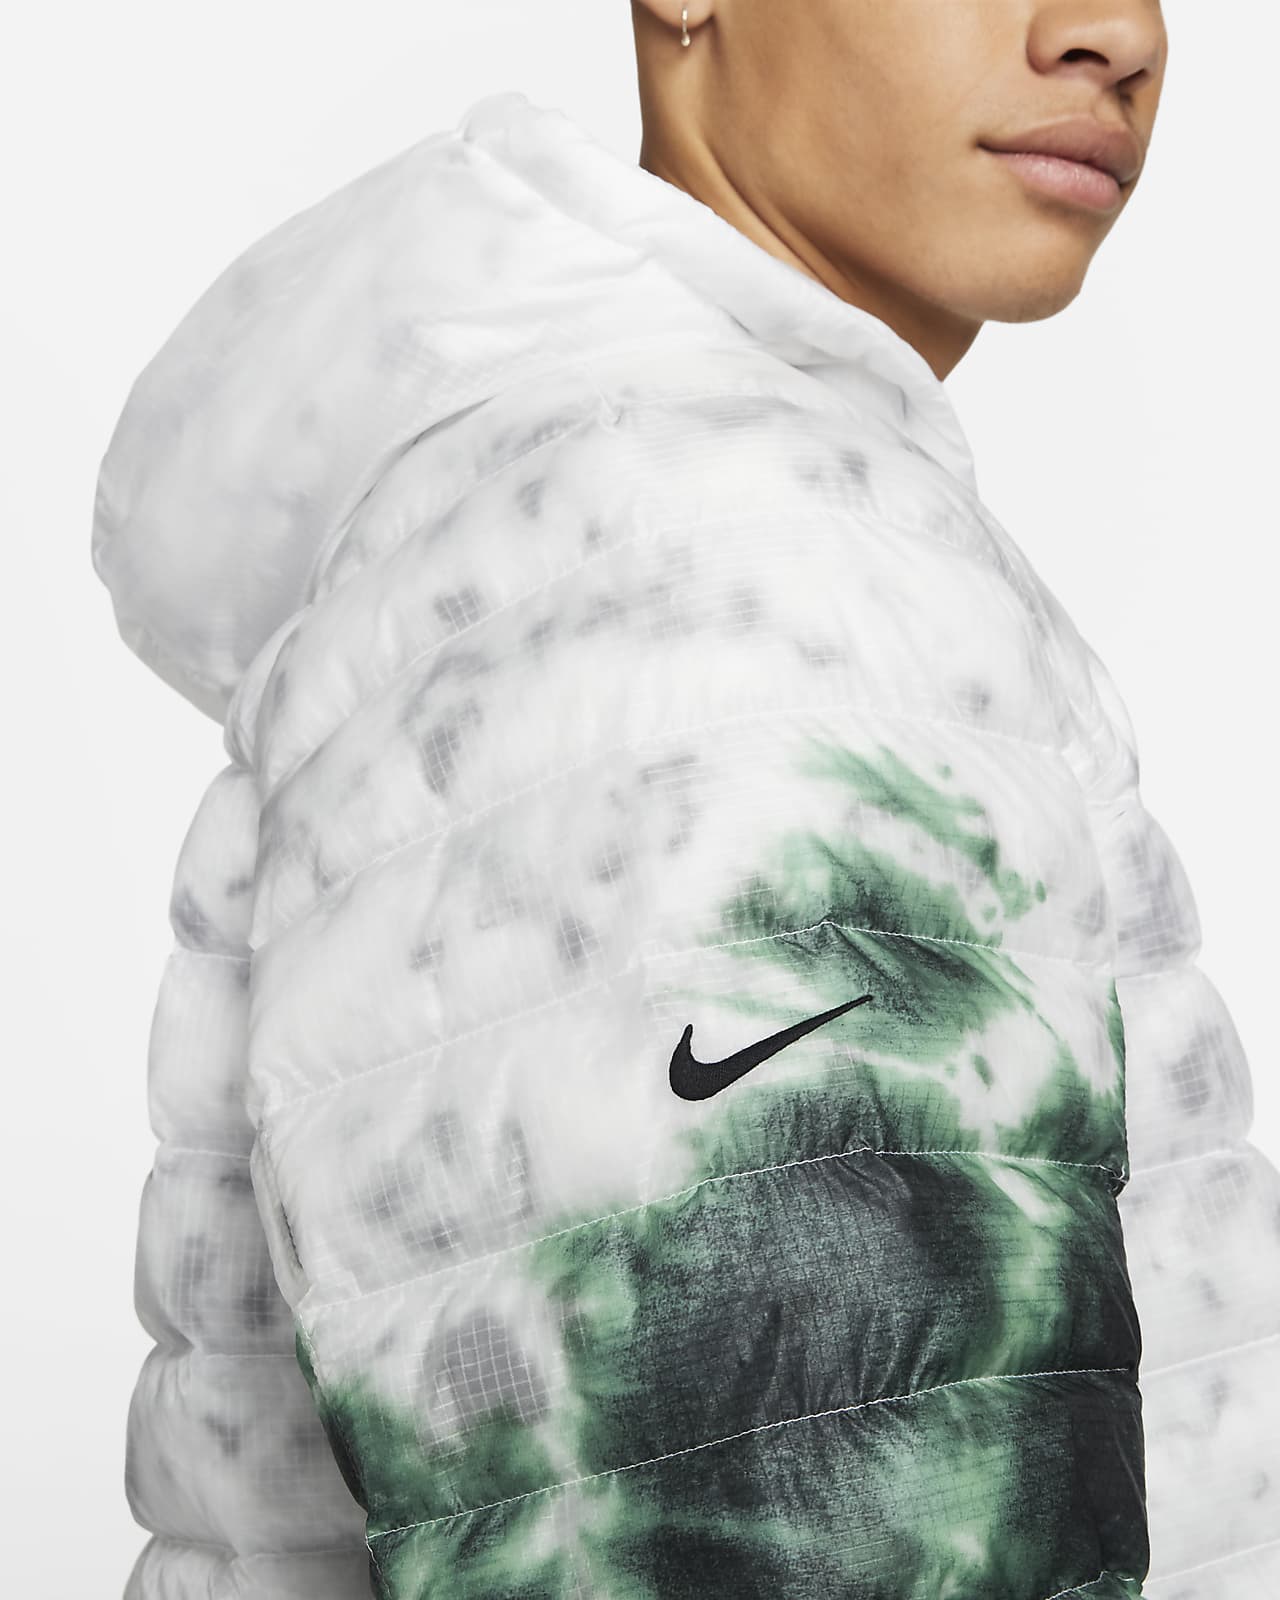 nike pullover jackets